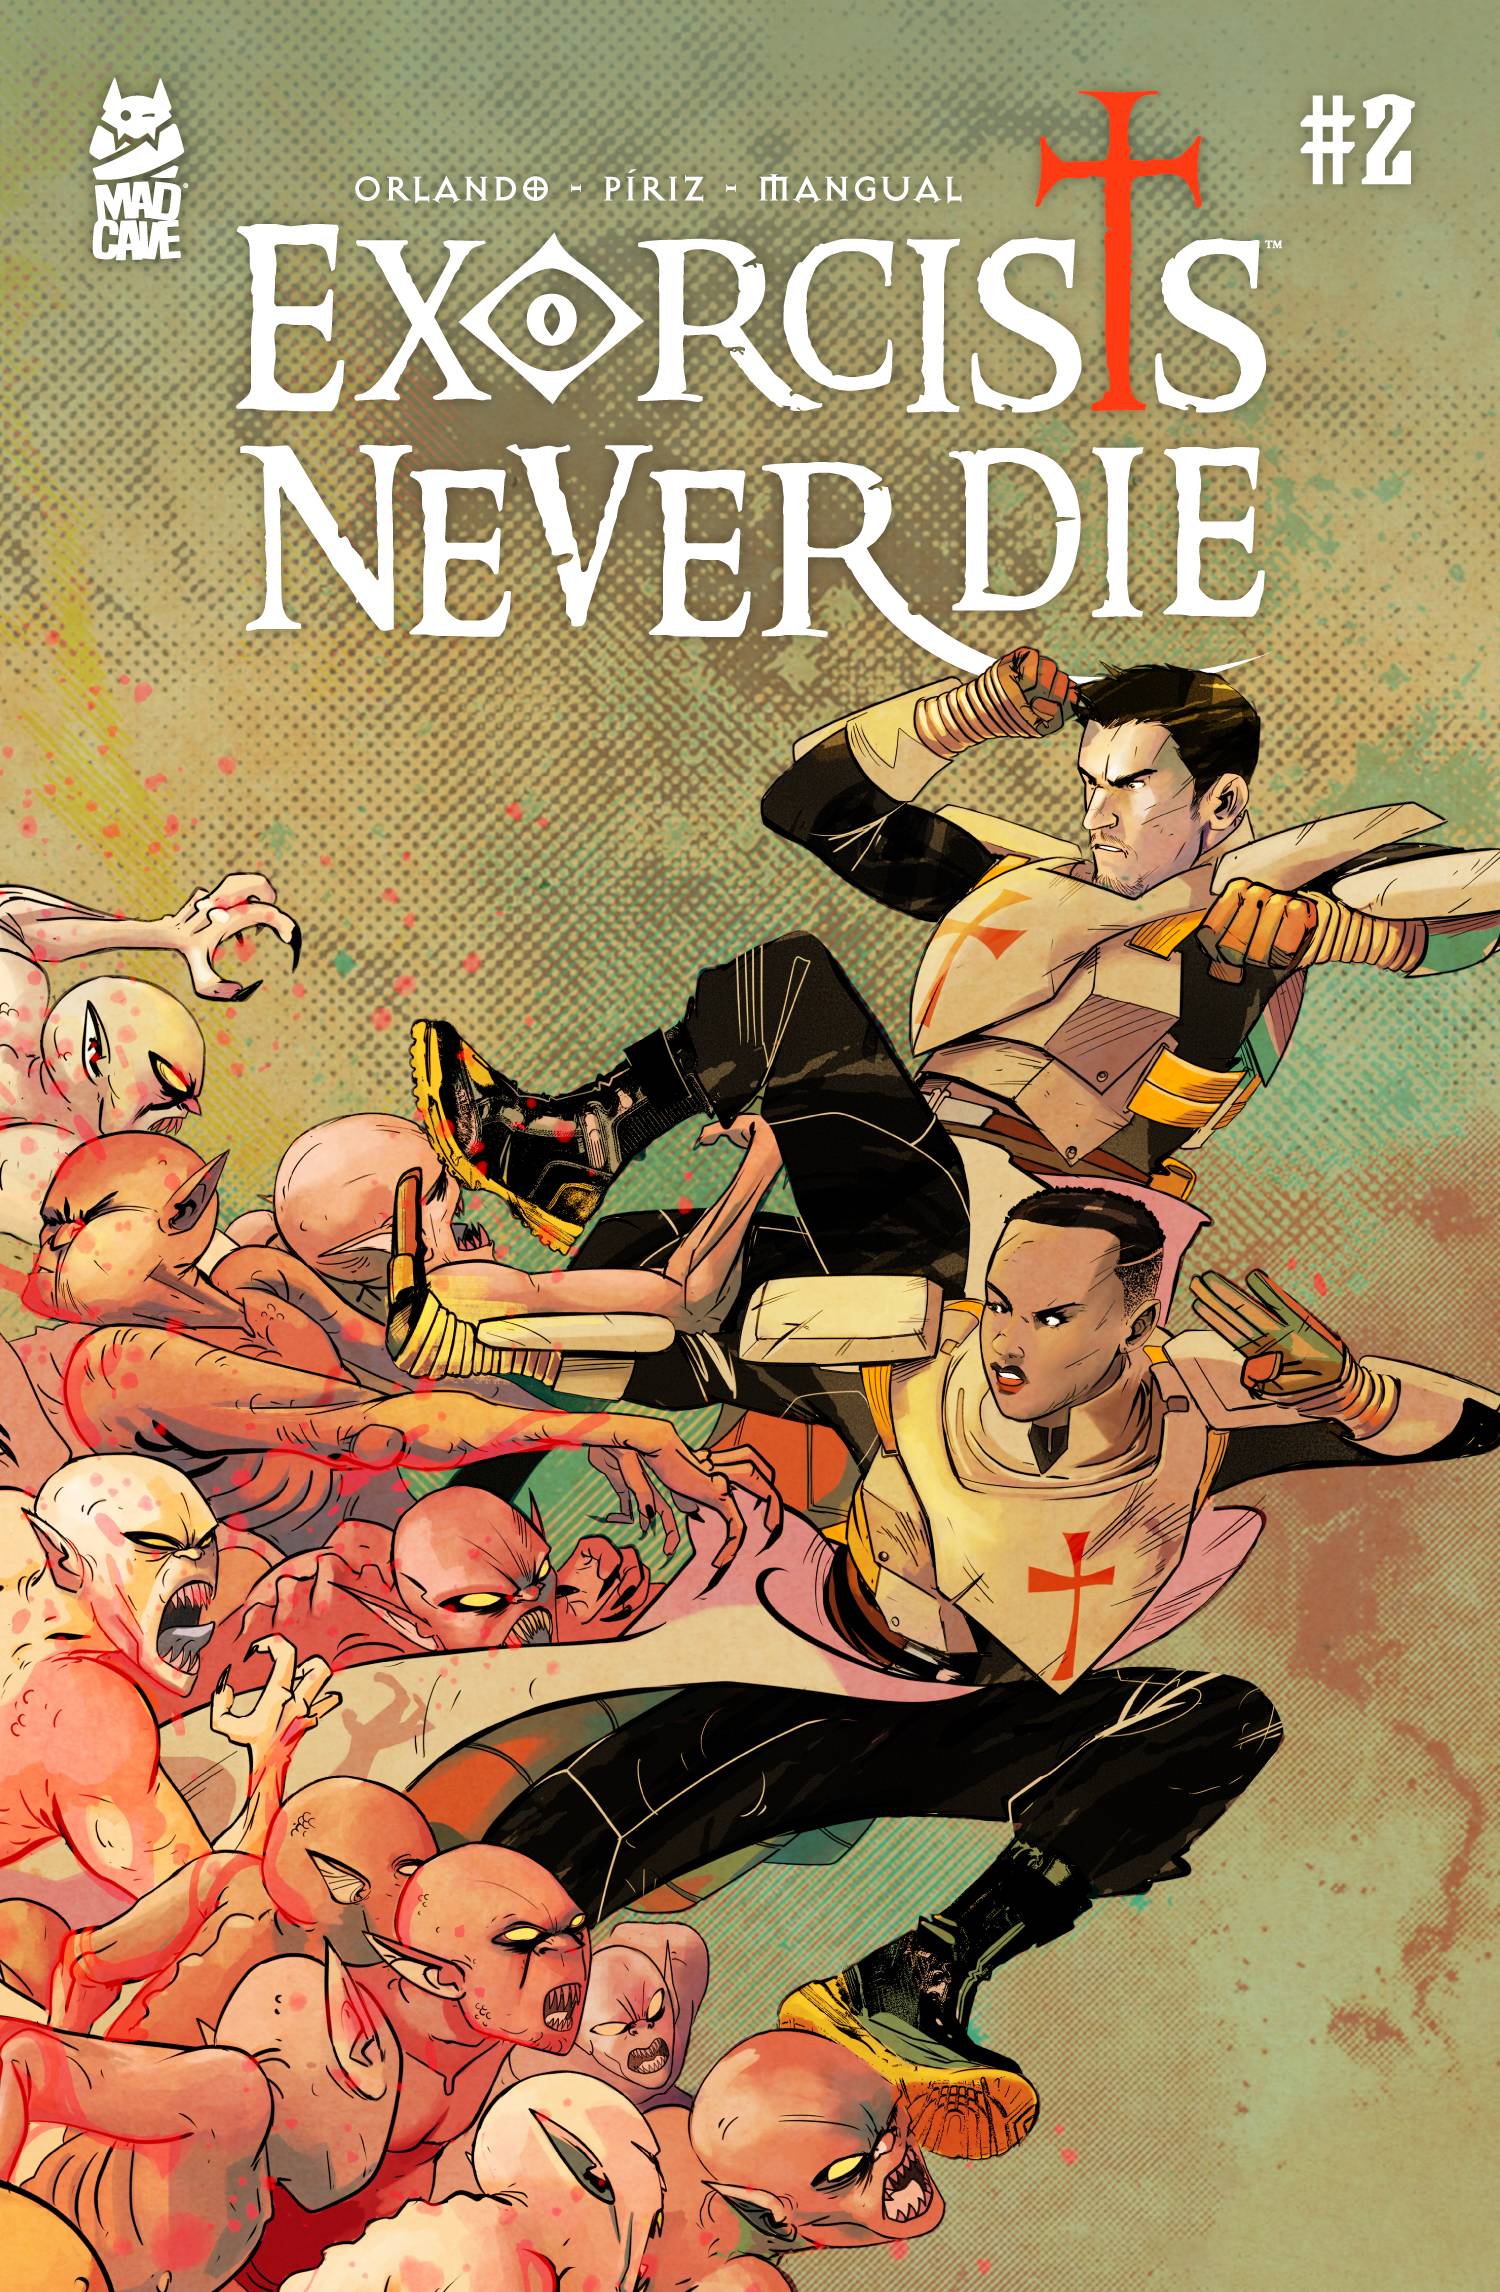 EXORCISTS NEVER DIE #2 (OF 6)